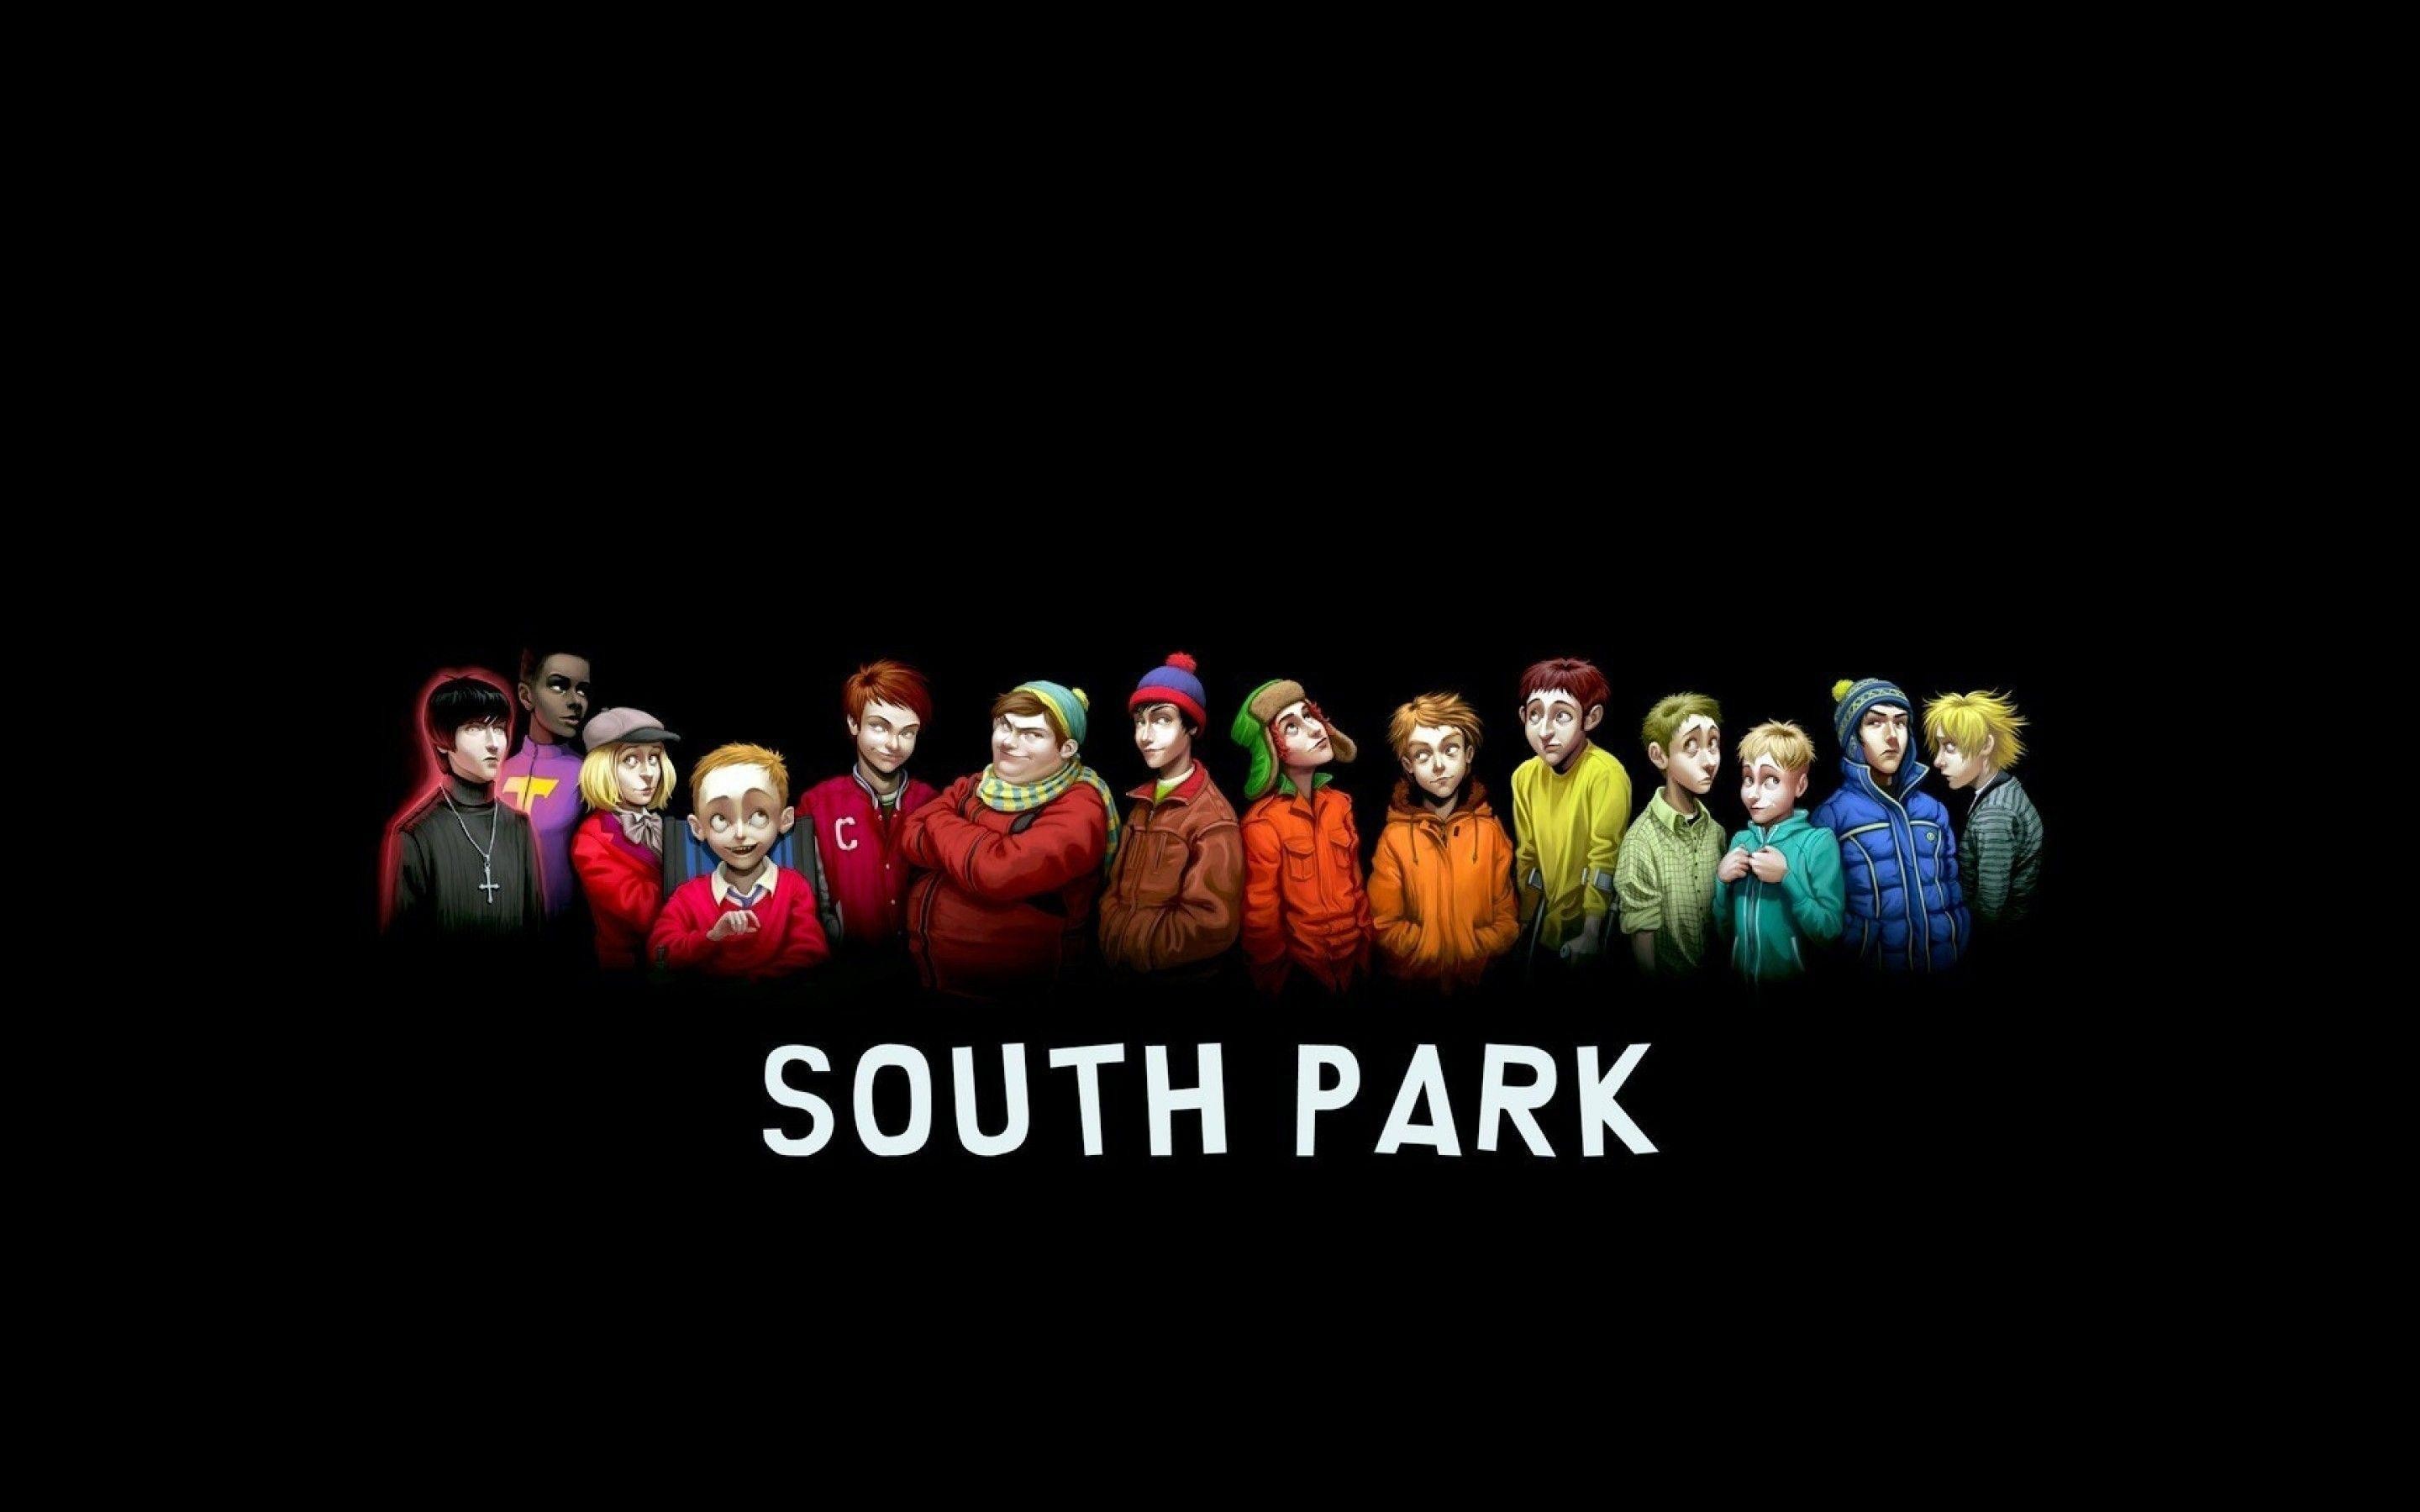 2880x1800 South Park Wallpapers - Full HD wallpaper search - page 2